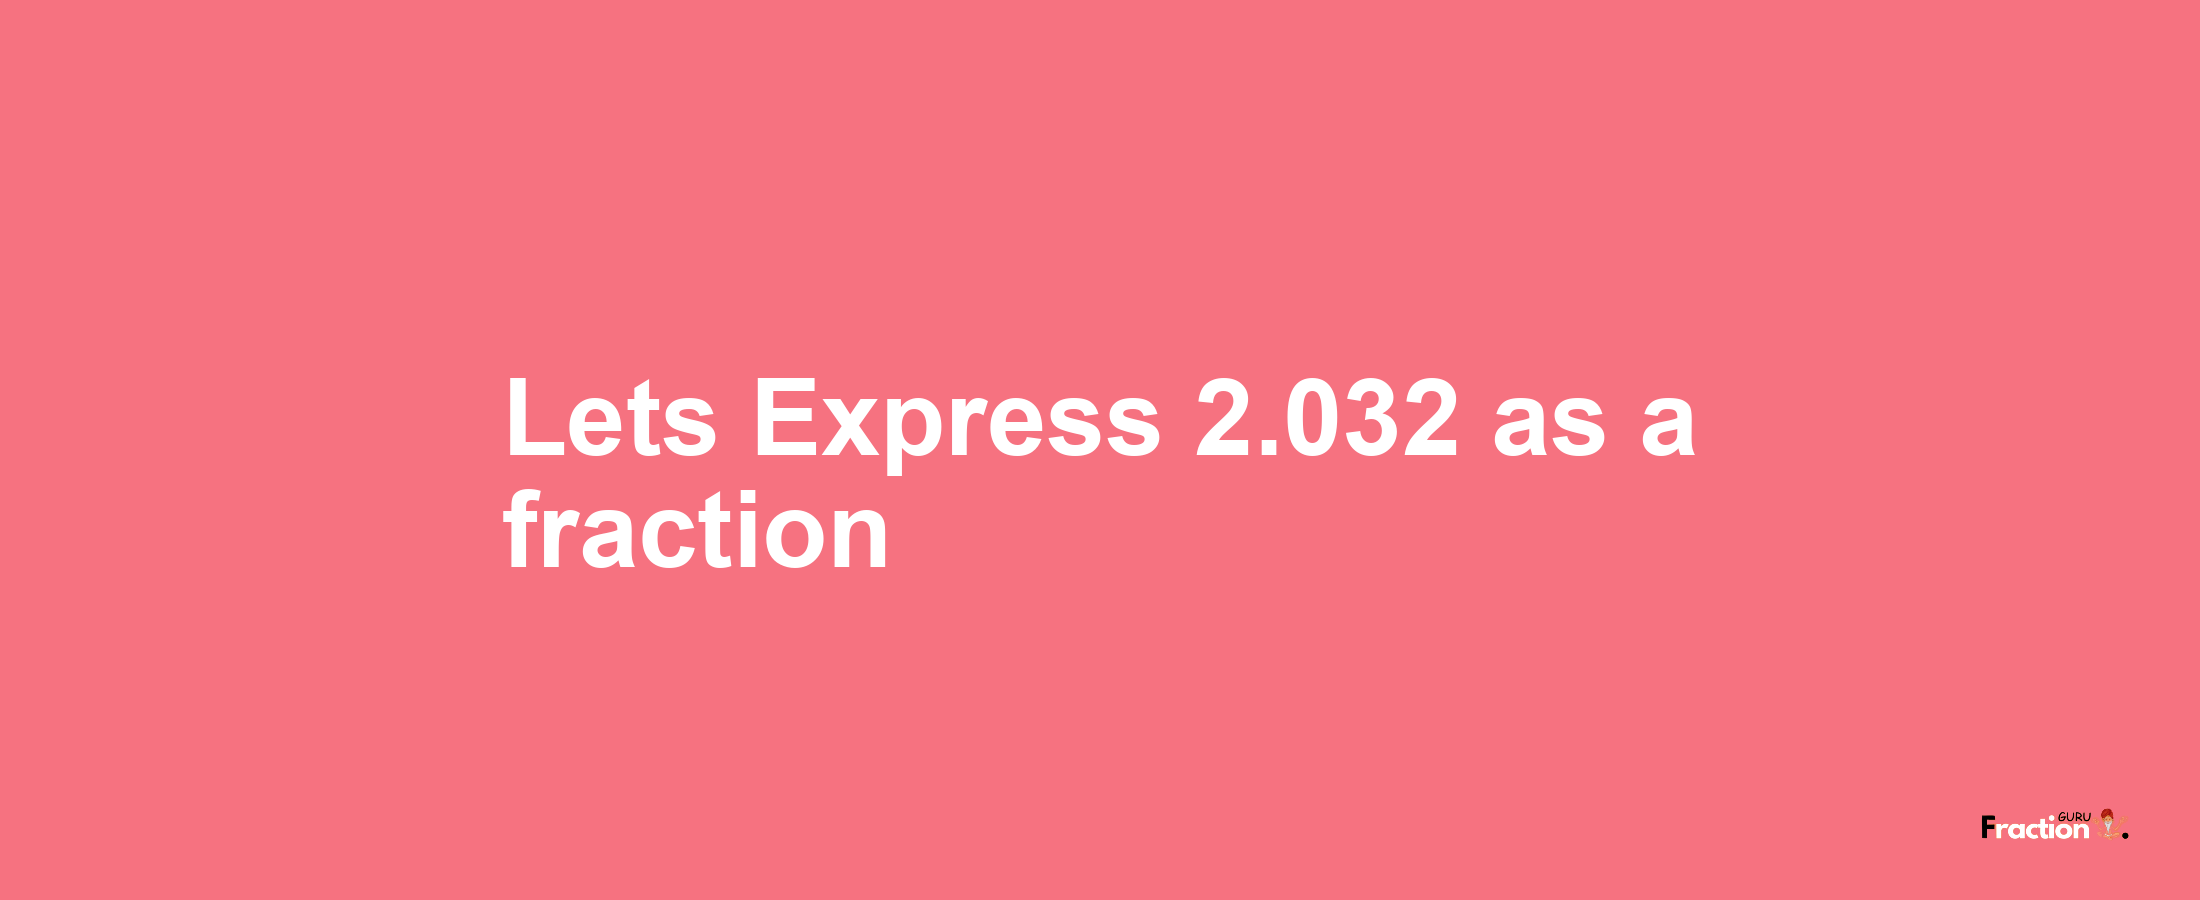 Lets Express 2.032 as afraction